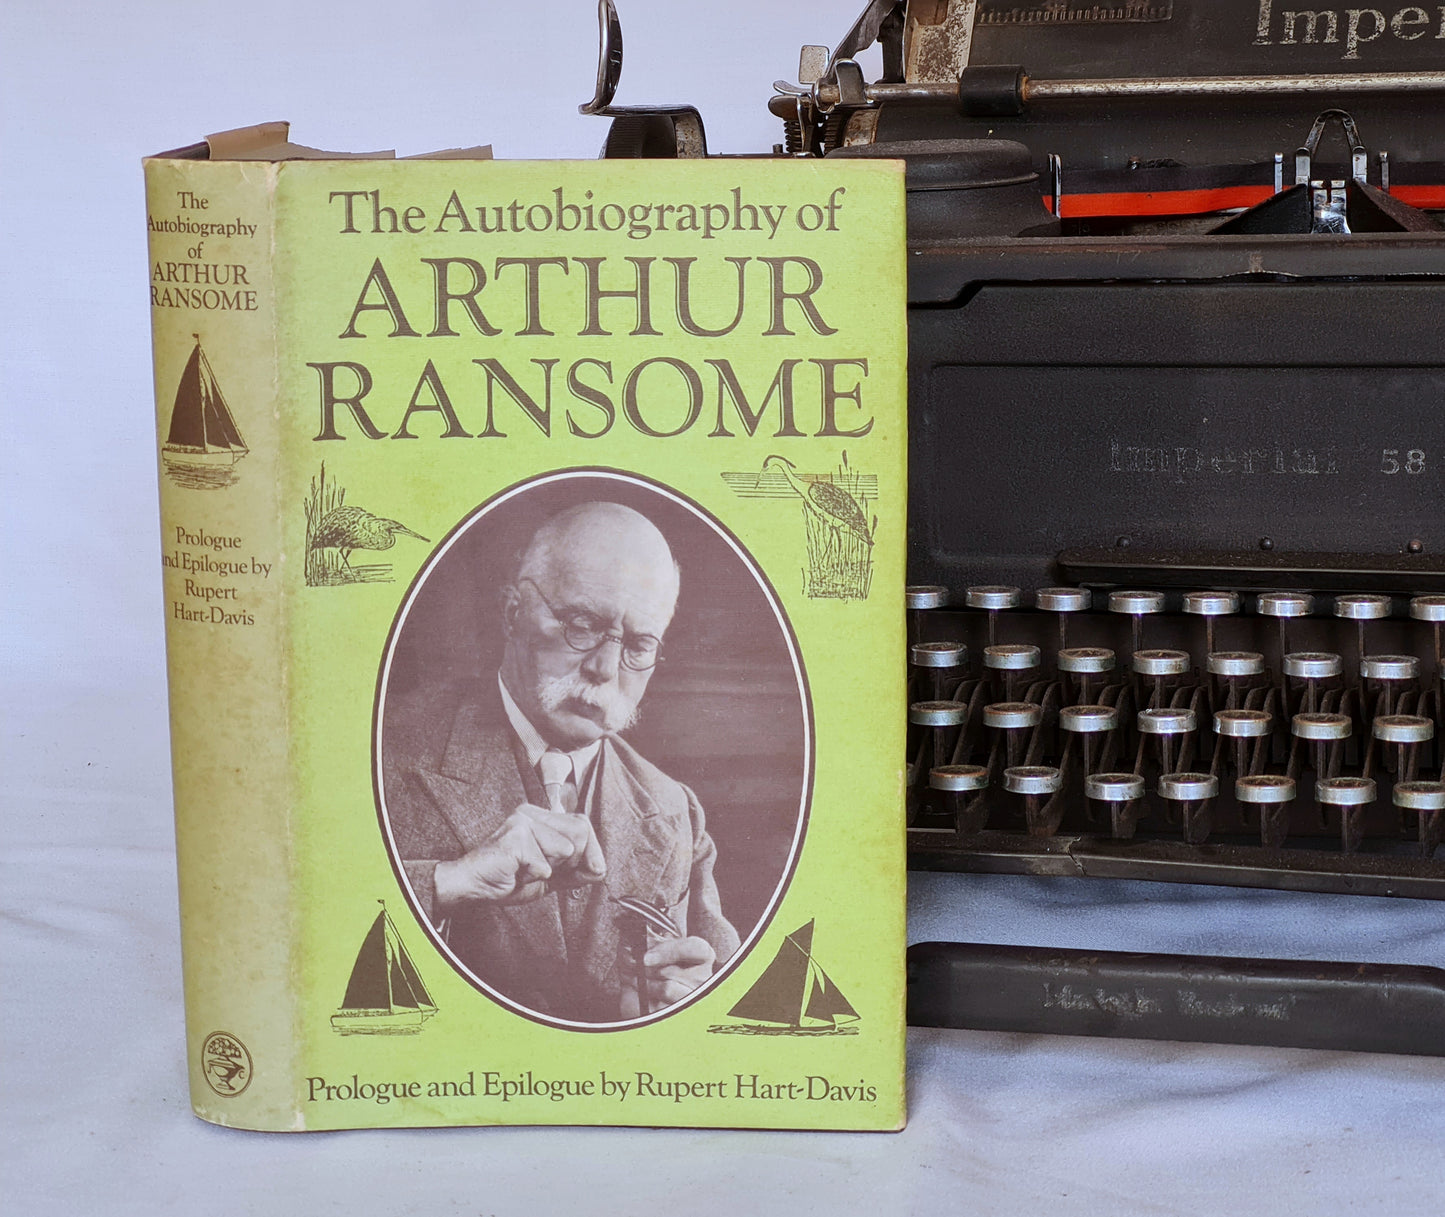 1976 The Autobiography of Arthur Ransome / First Edition, Jonathan Cape, London / With Dust Jacket / In Good Condition / Swallows & Amazons